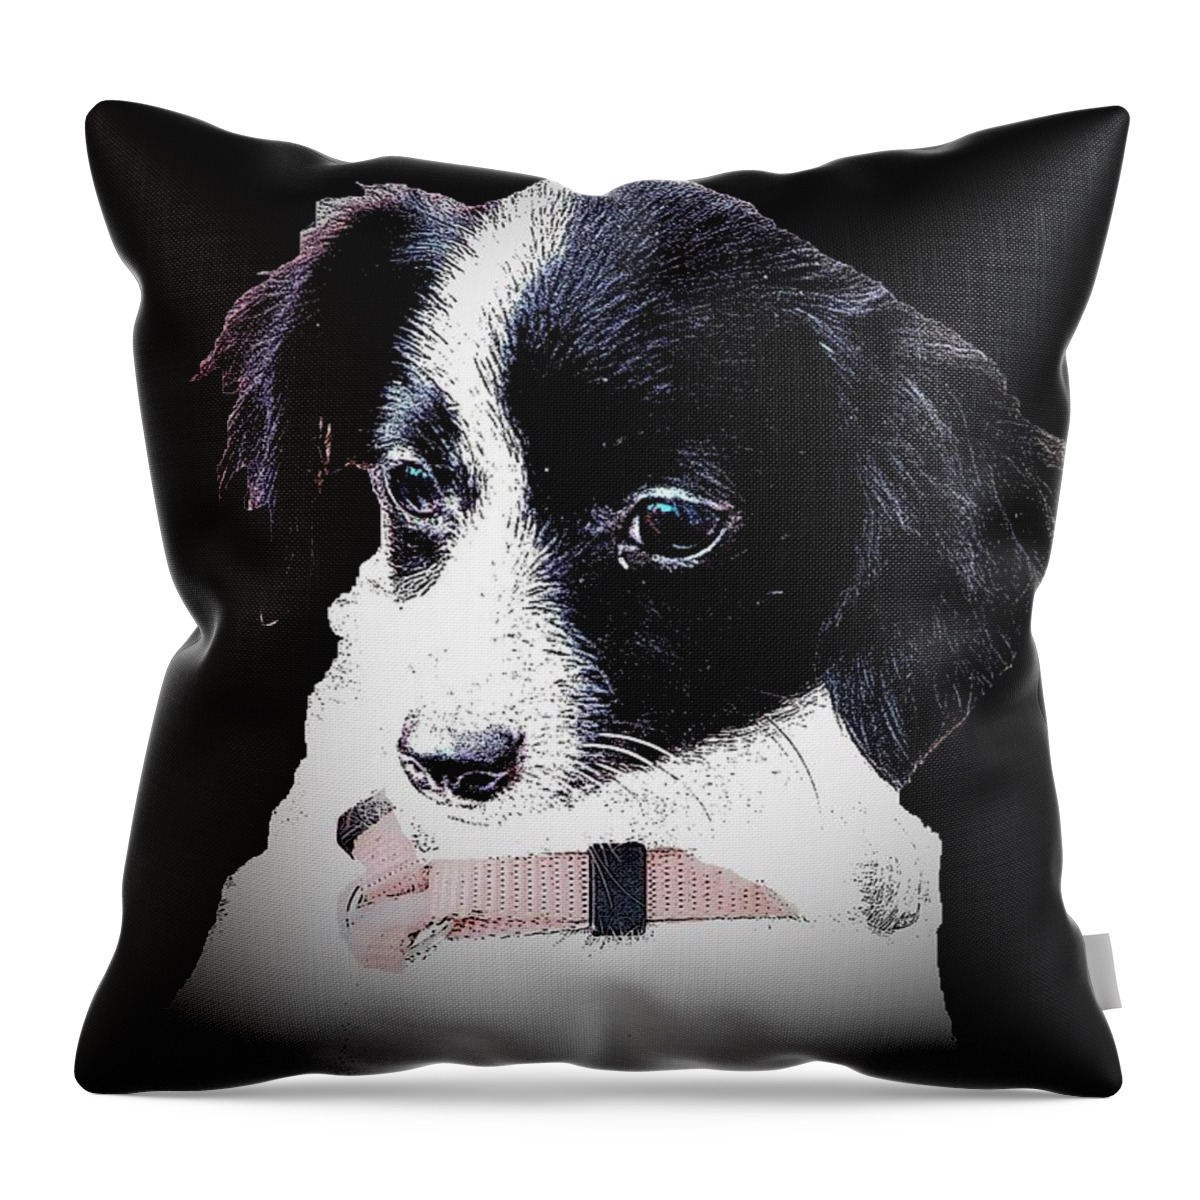 Small Dog Throw Pillow featuring the digital art Small Dog by Cliff Wilson